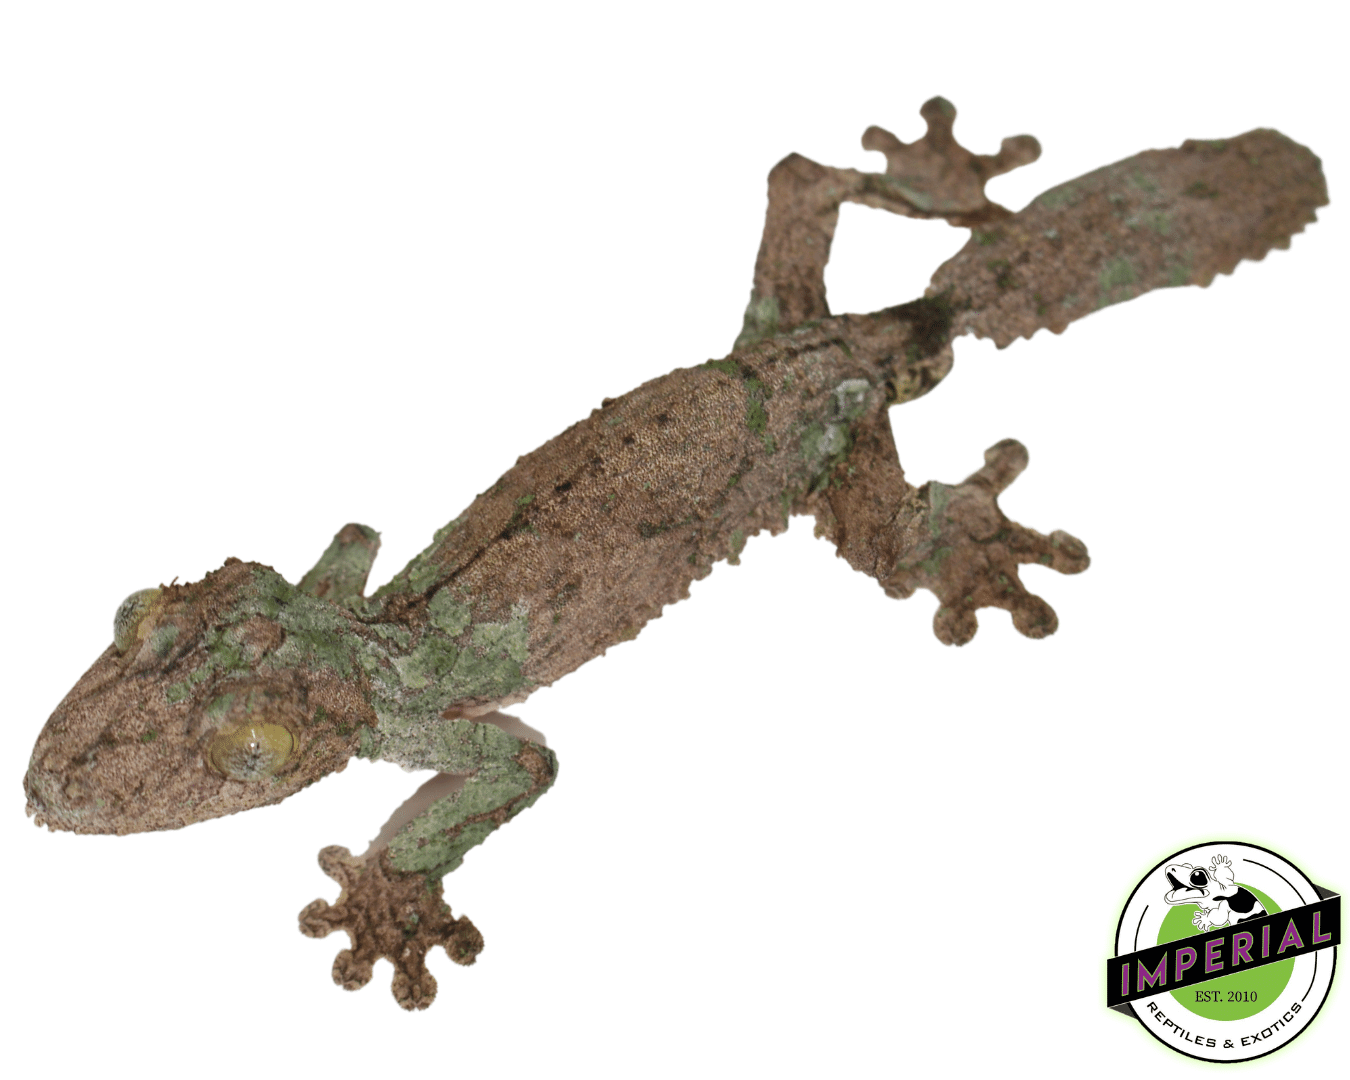 mossy leaf tail gecko for sale, buy reptiles online